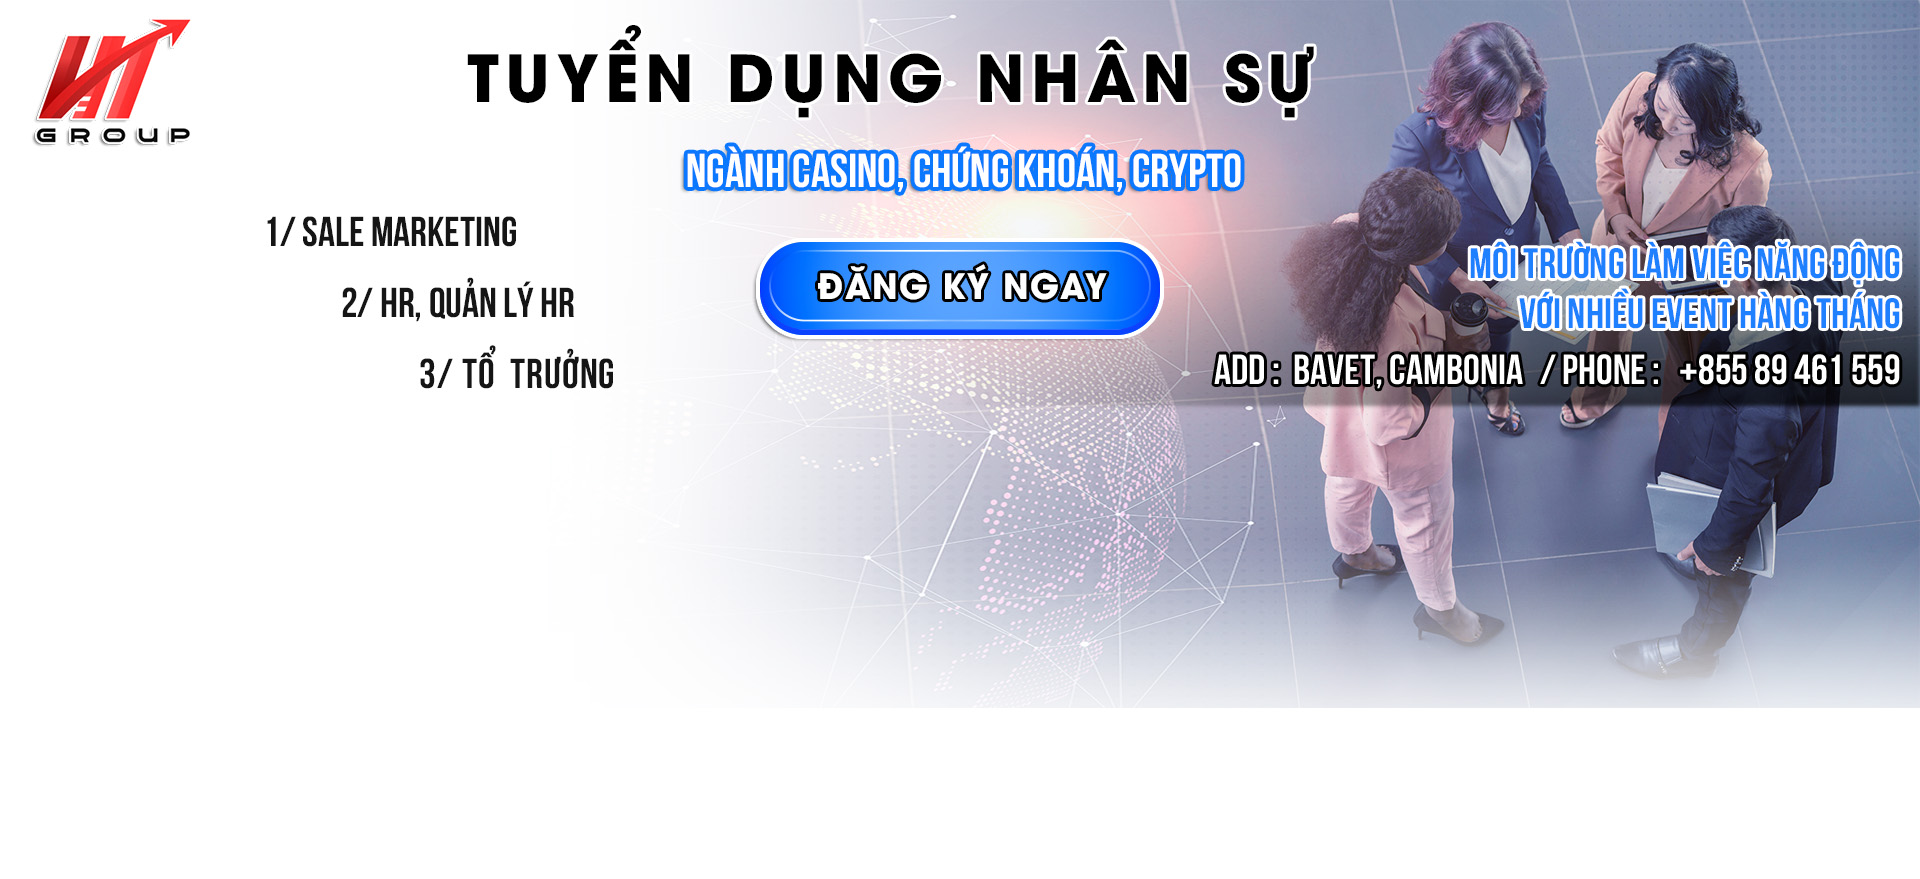 Banner tuyển dụng h3t group